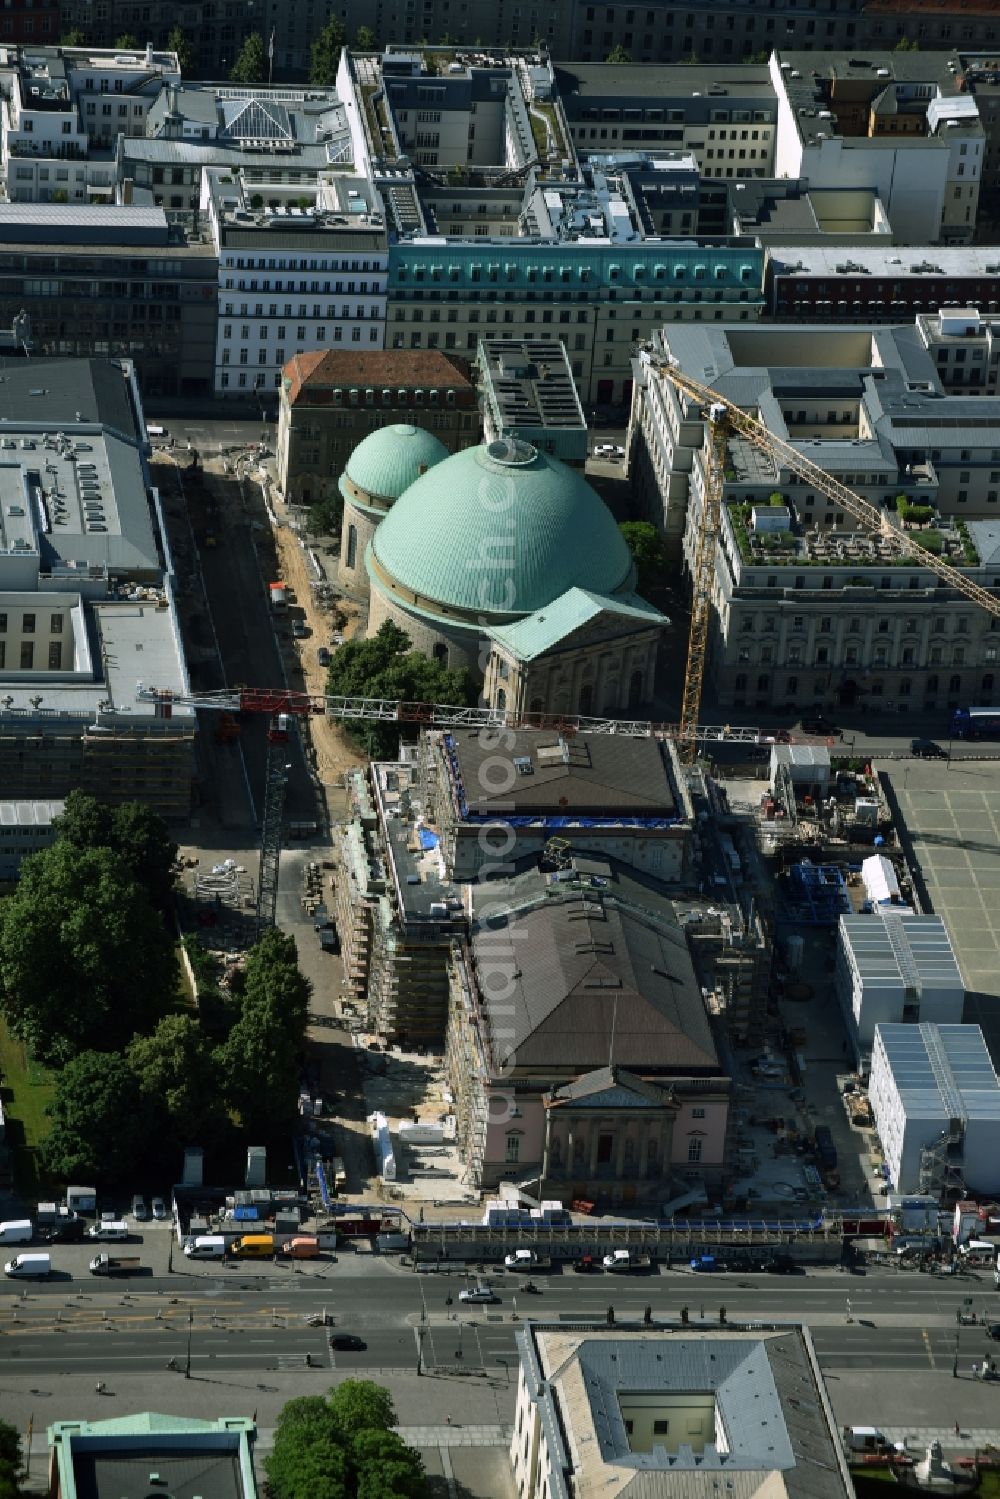 Berlin from above - View of the reconstruction and renovation of the building of the Staatsoper Unter den Linden in Berlin at Bebelplatz. It is the oldest opera house and theater building in Berlin. A new building will serve as stacks and warehouse for the Staatsoper Komplex. The architect HG Merz is a overseeing the reconstruction of the historical building complex